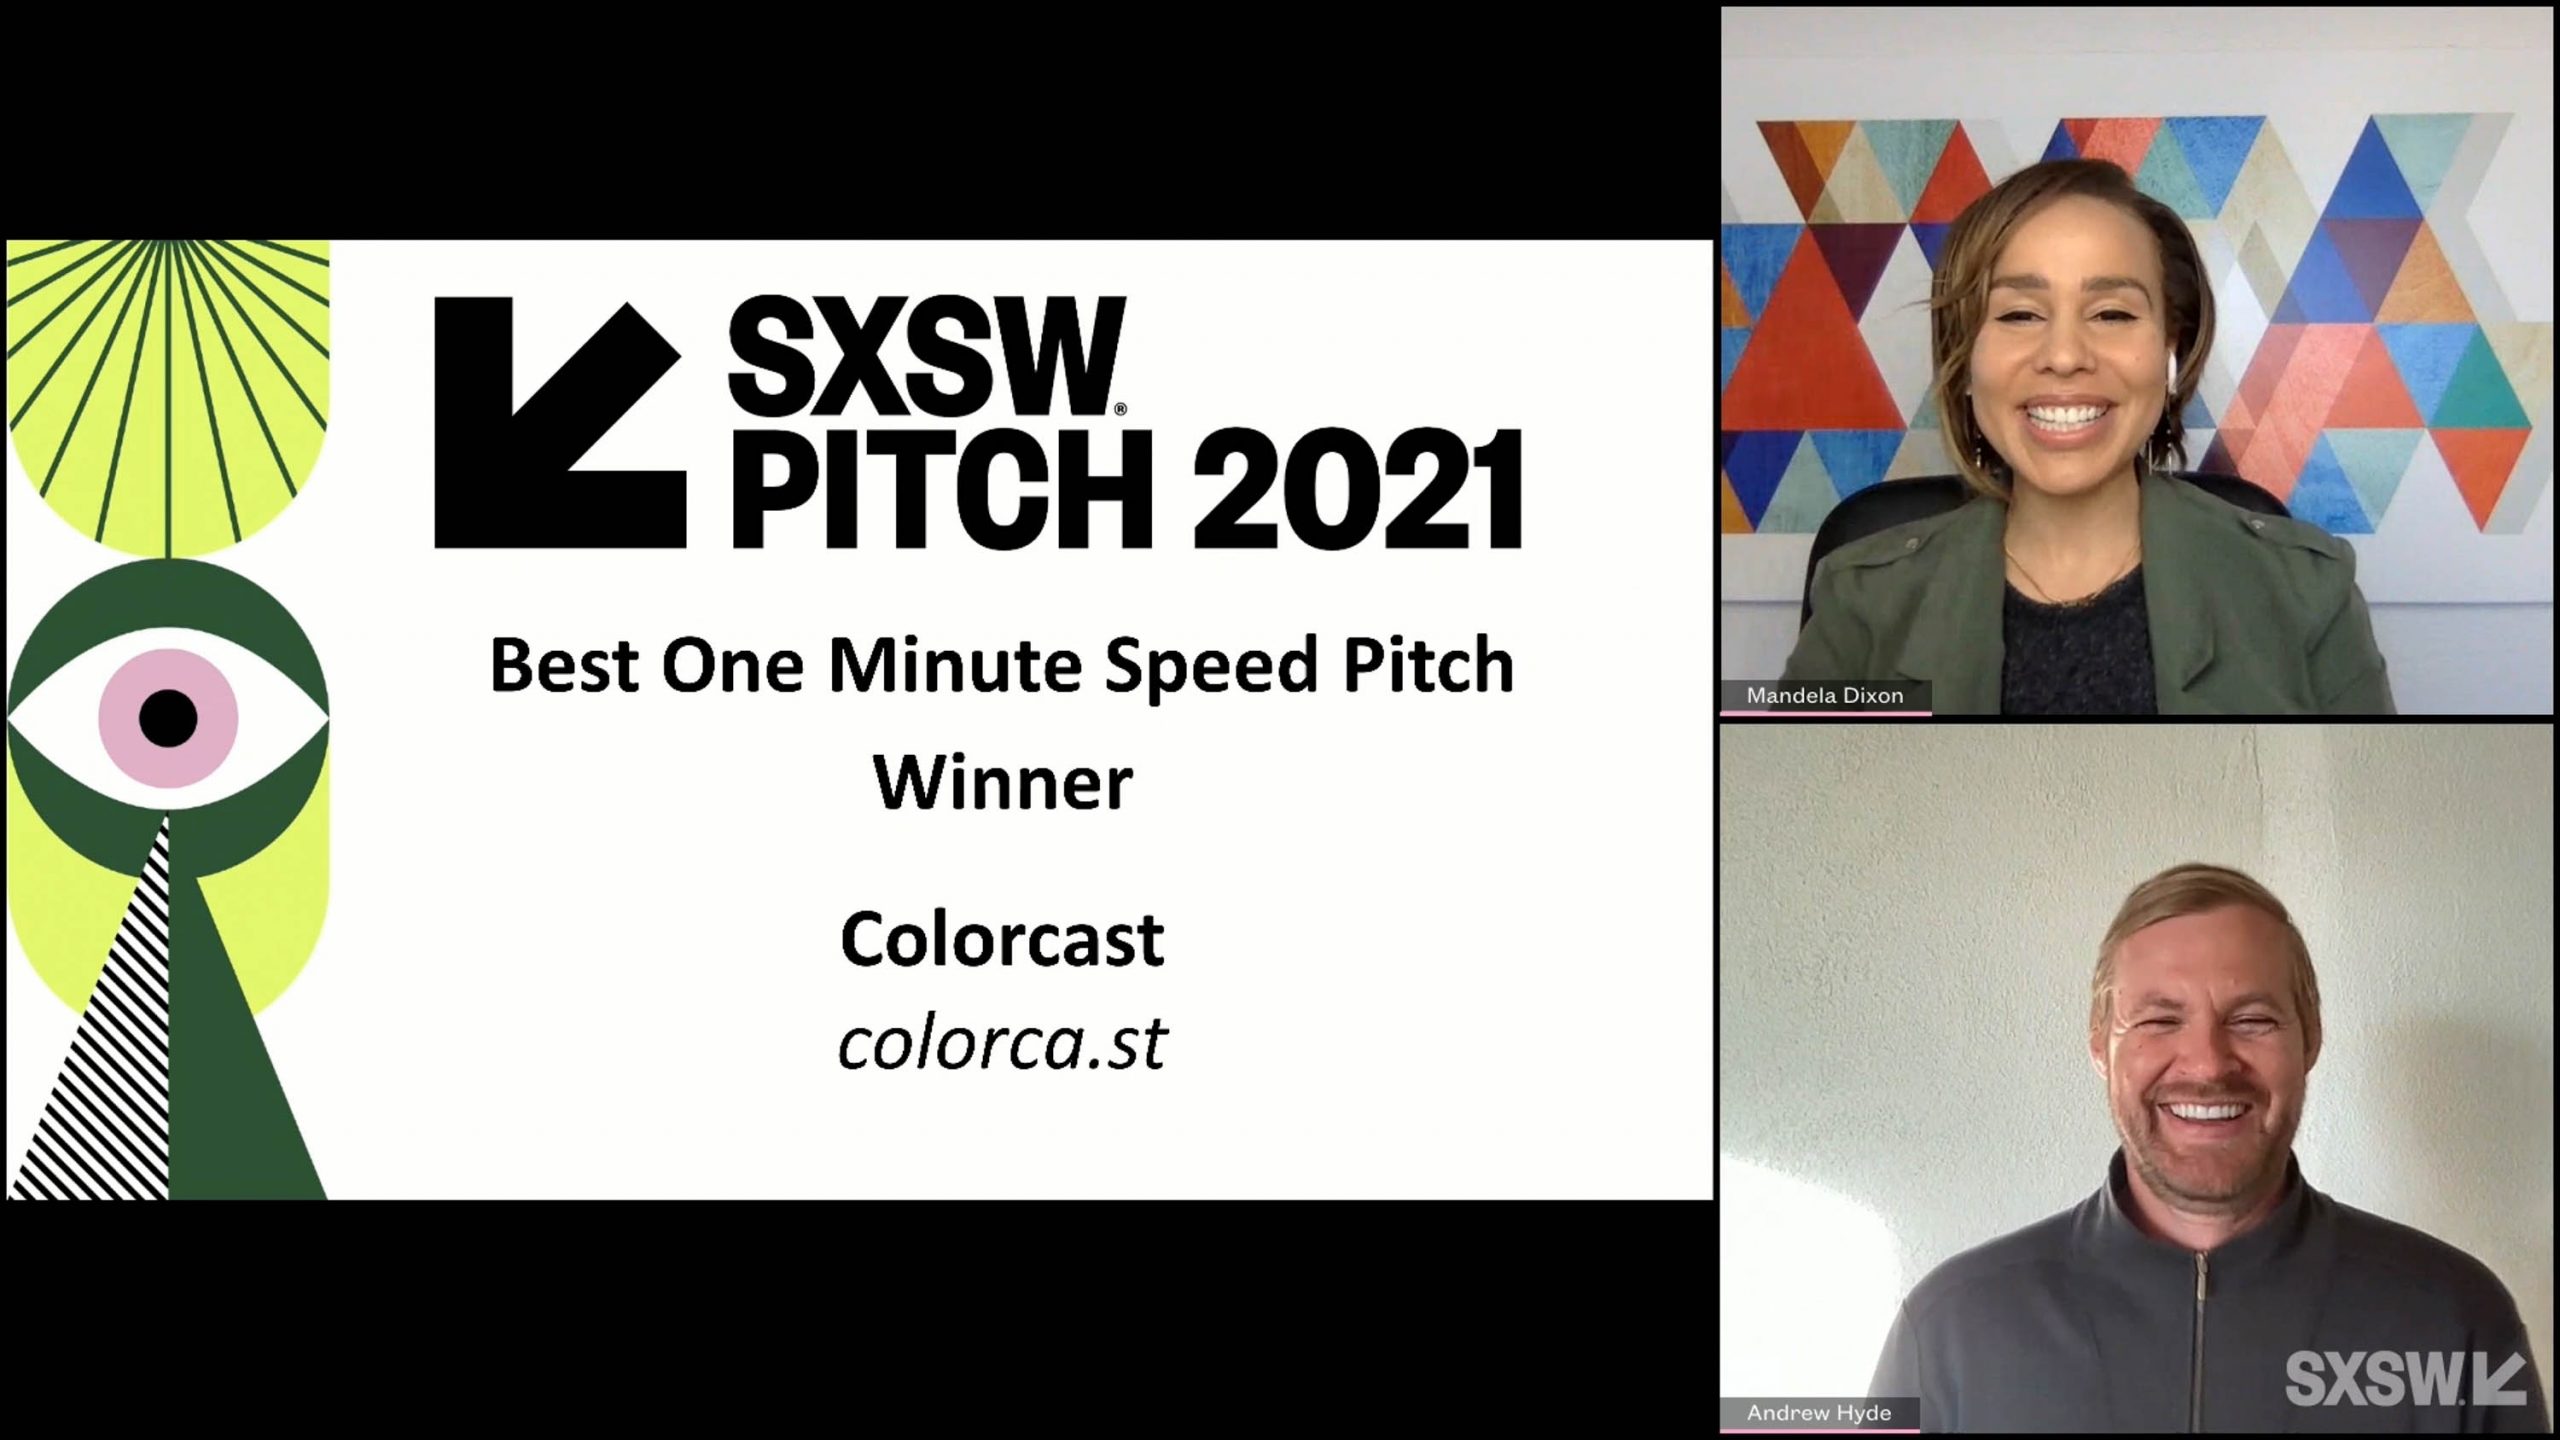 SXSW Pitch participant Colorcast wins the Best One Minute Speed Pitch category at the SXSW Pitch Awards during SXSW Online on March 20, 2021.